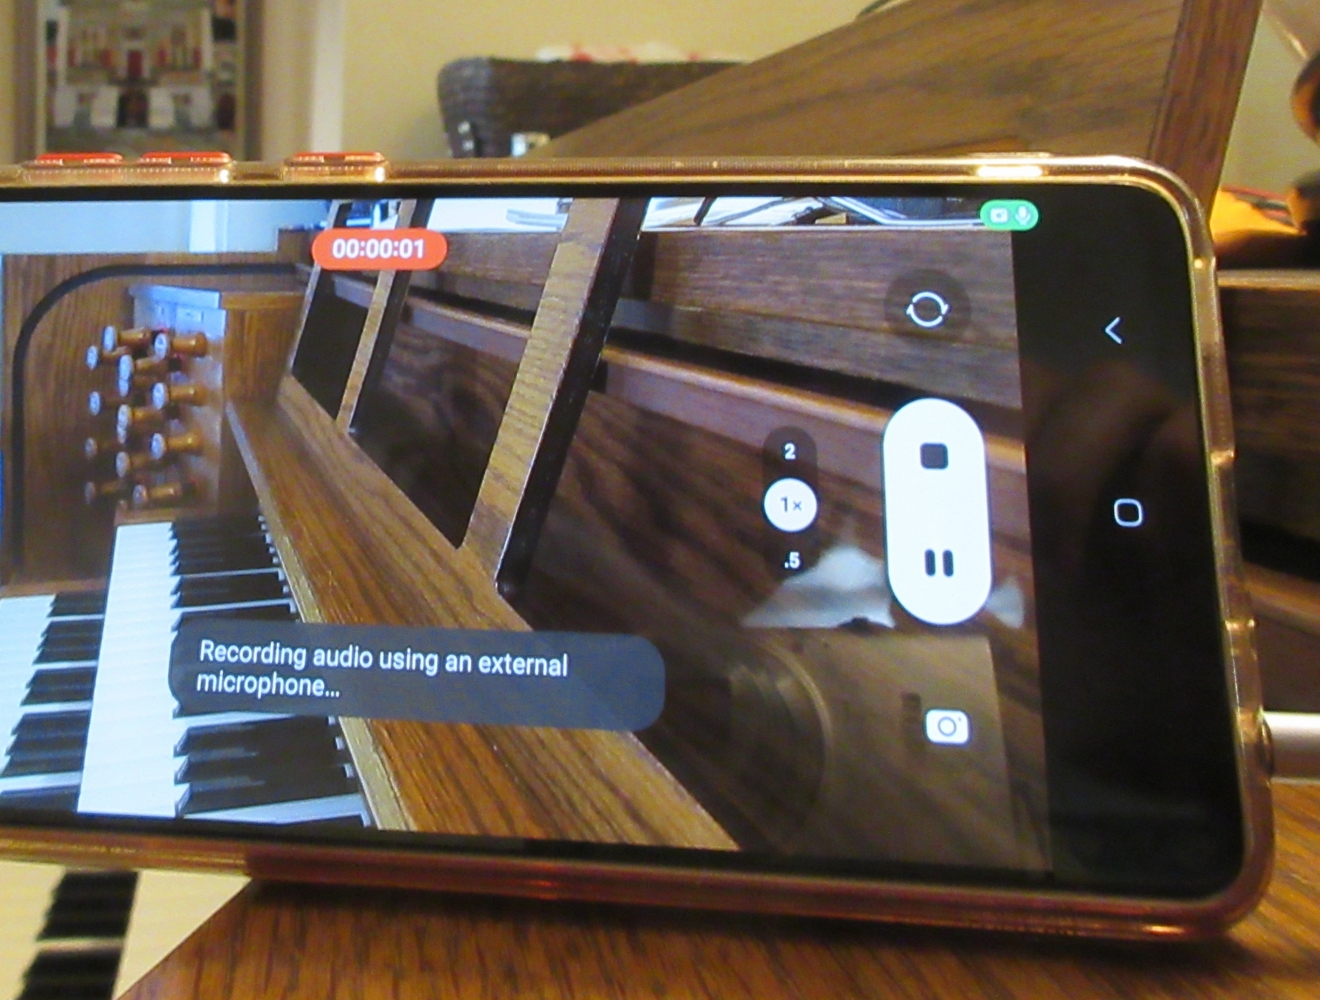 A phone with a video app open, pointed at an organ console